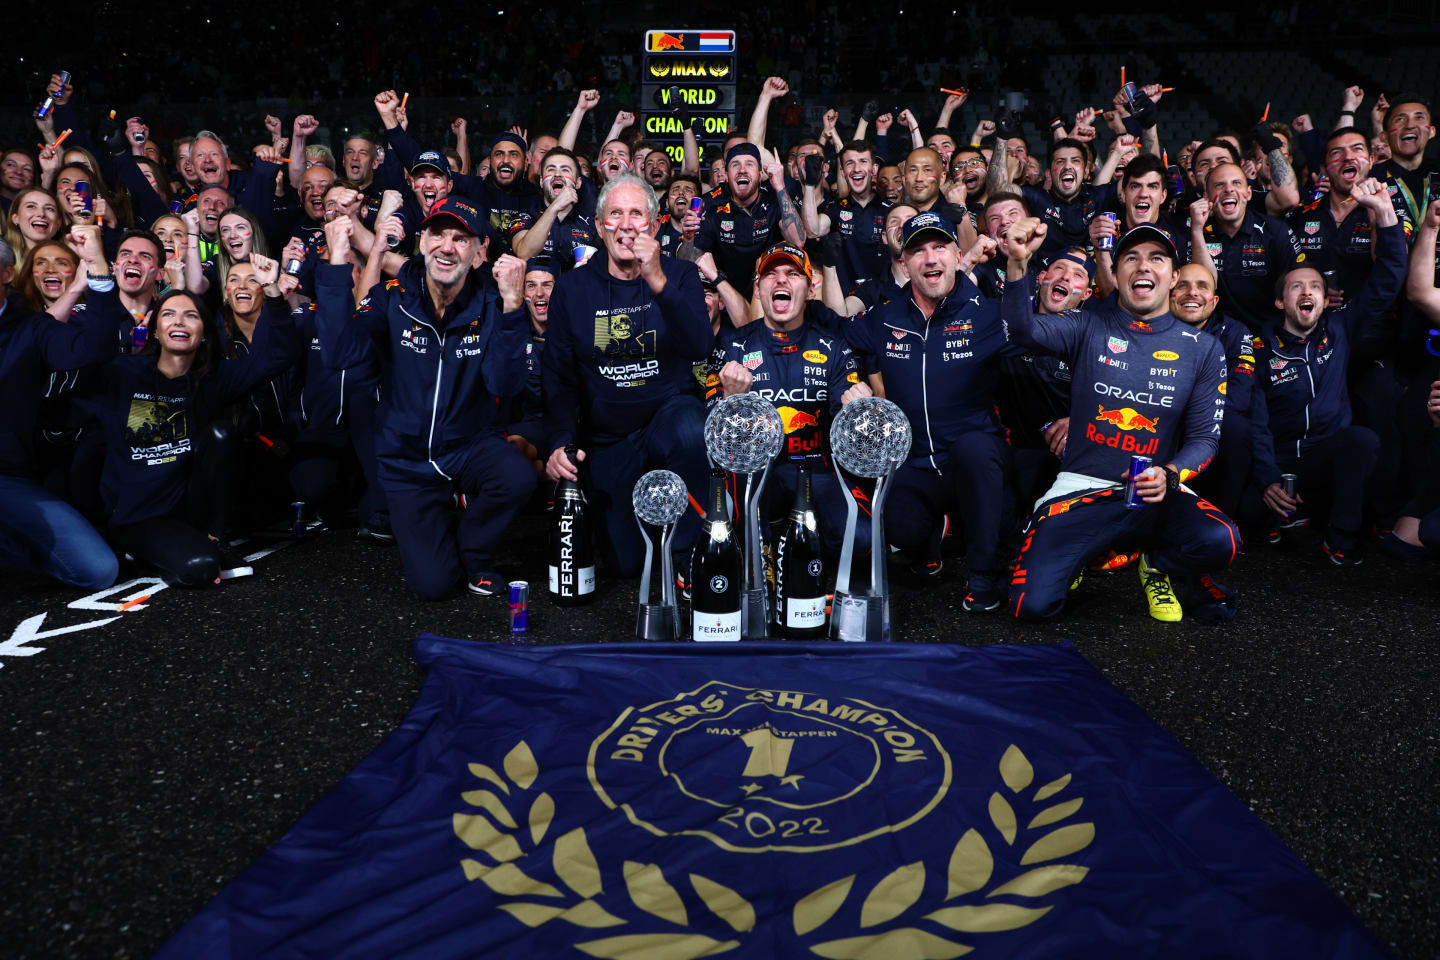 SUZUKA, JAPAN - OCTOBER 09: Race winner and 2022 F1 World Drivers Champion Max Verstappen of Netherlands and Oracle Red Bull Racing celebrates with his team after the F1 Grand Prix of Japan at Suzuka International Racing Course on October 09, 2022 in Suzuka, Japan. (Photo by Dan Istitene - Formula 1/Formula 1 via Getty Images)